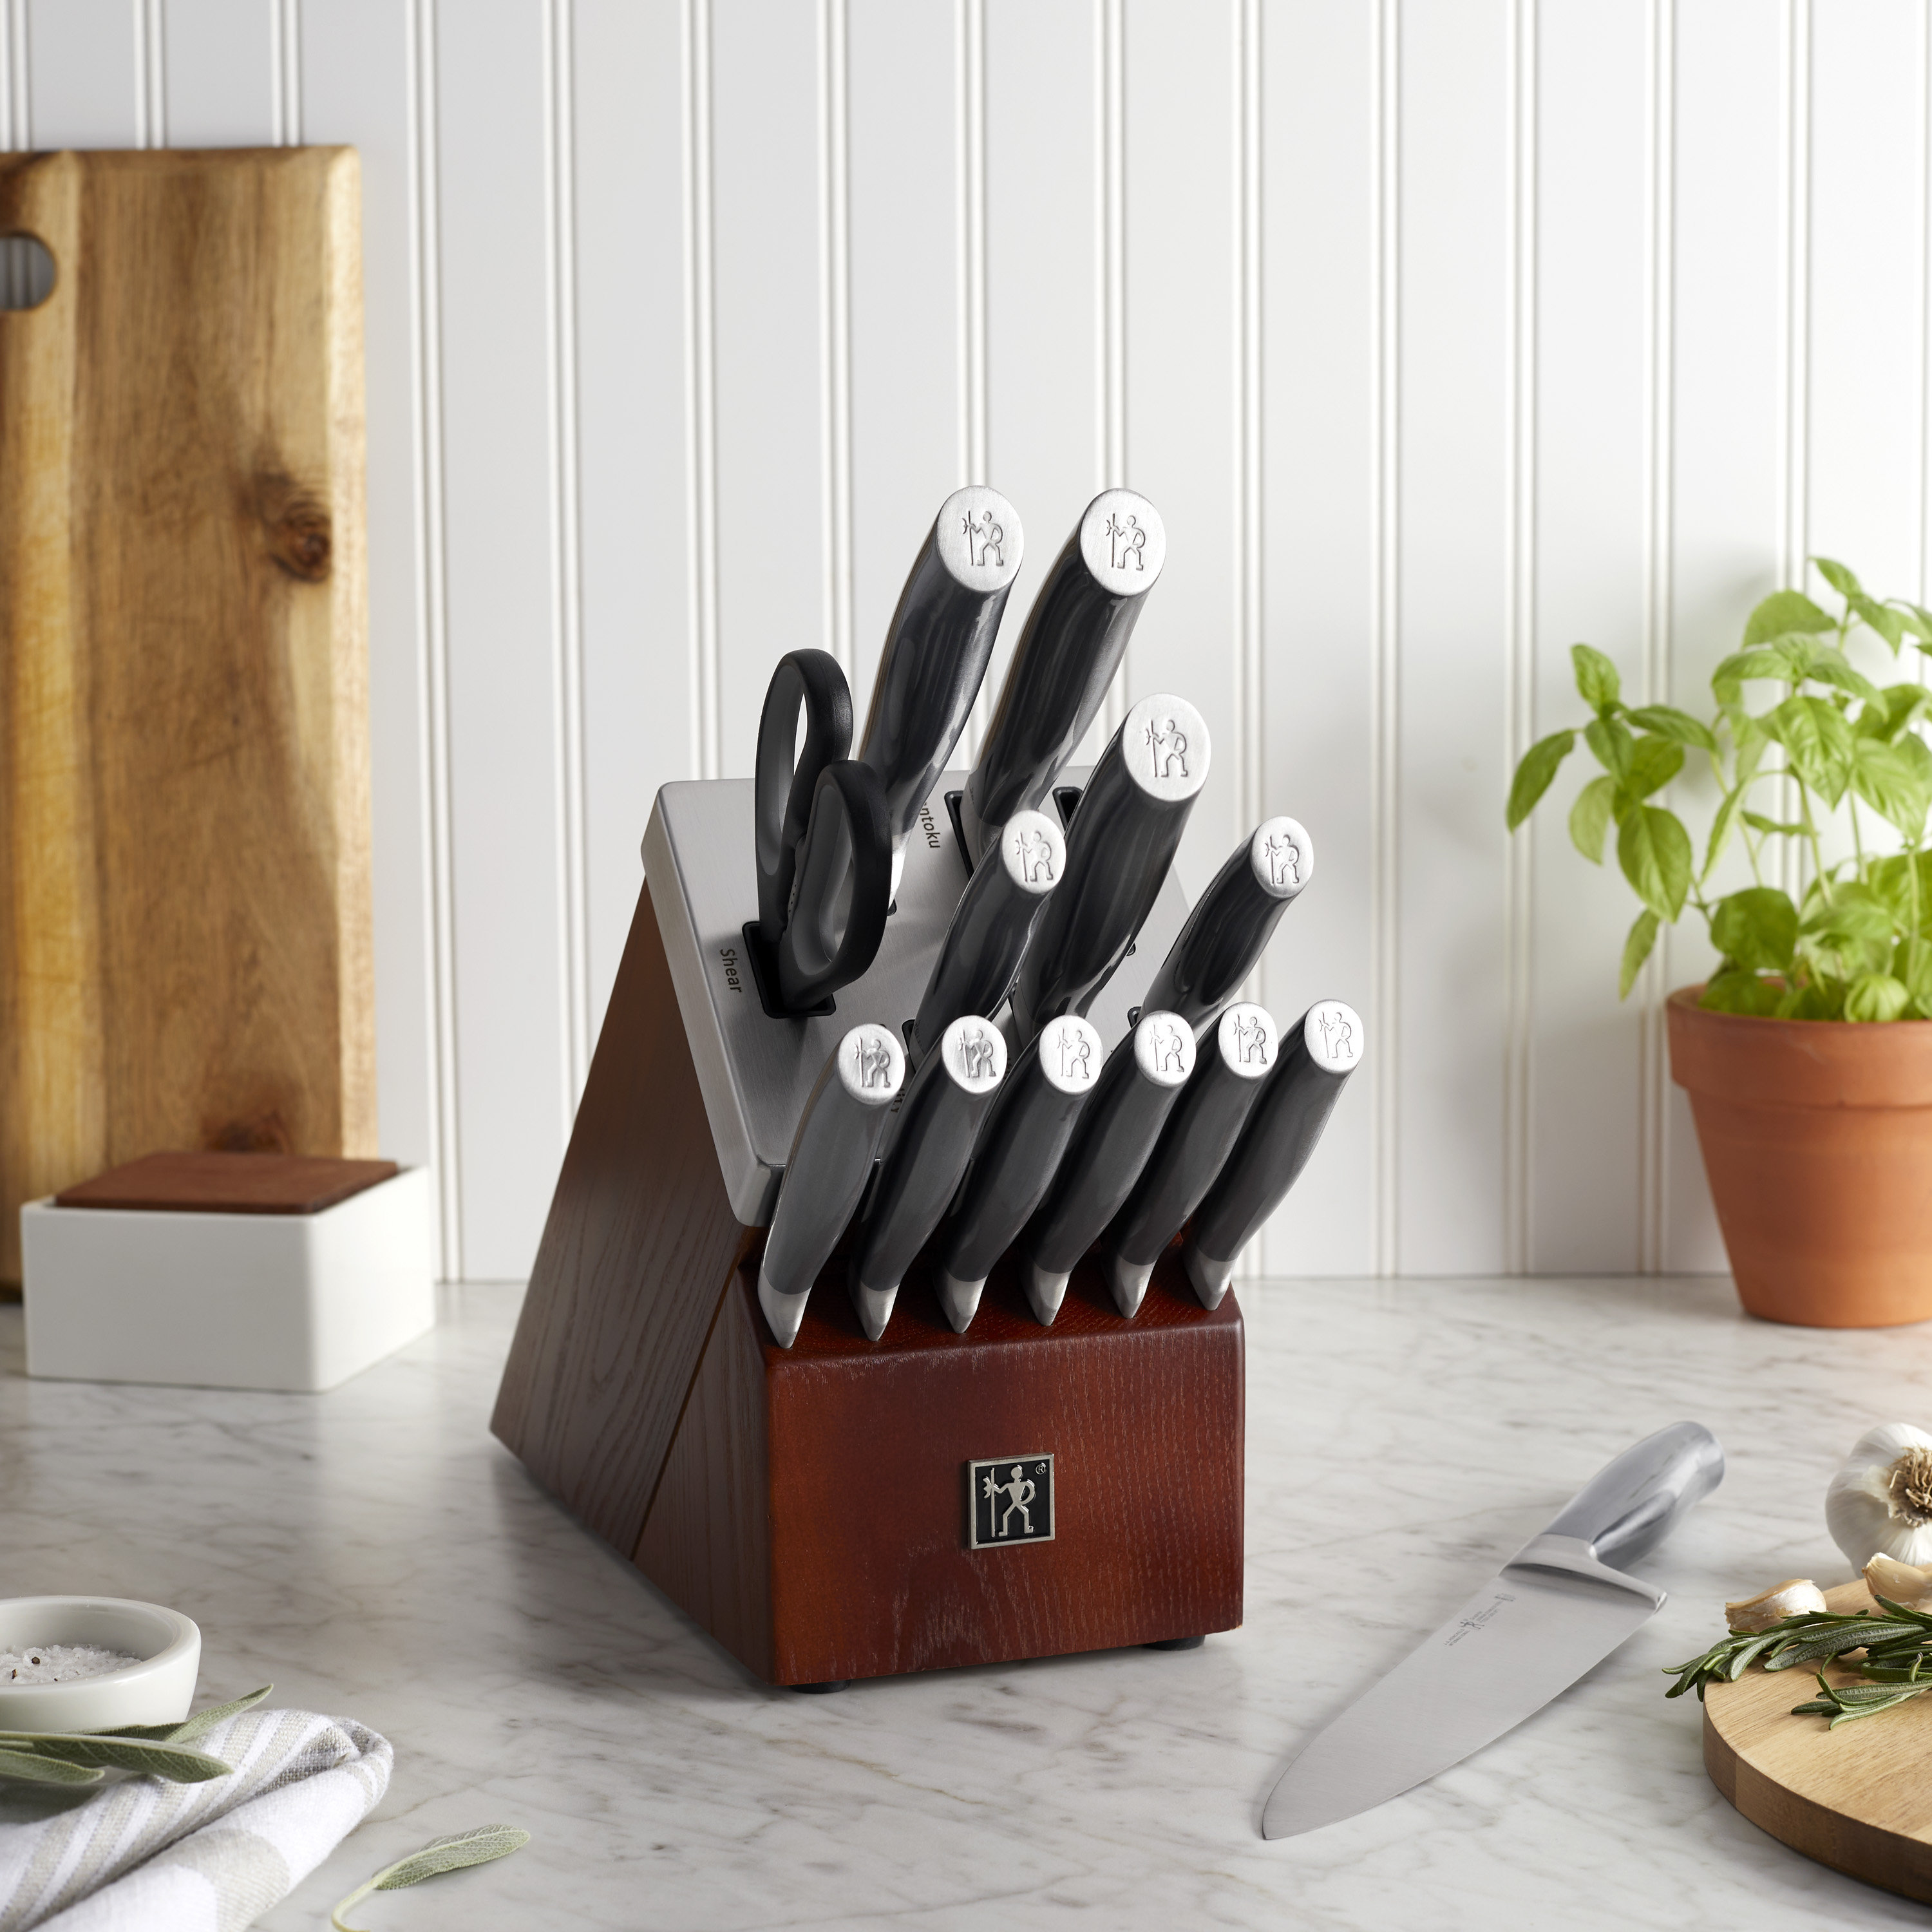  HENCKELS Graphite 14-piece Self-Sharpening Knife Block Set for  Paring, Boning, Santoku, Chefs, and Carving, Kitchen Shears, German  Engineered Informed by 100+ Years of Mastery, Black: Home & Kitchen